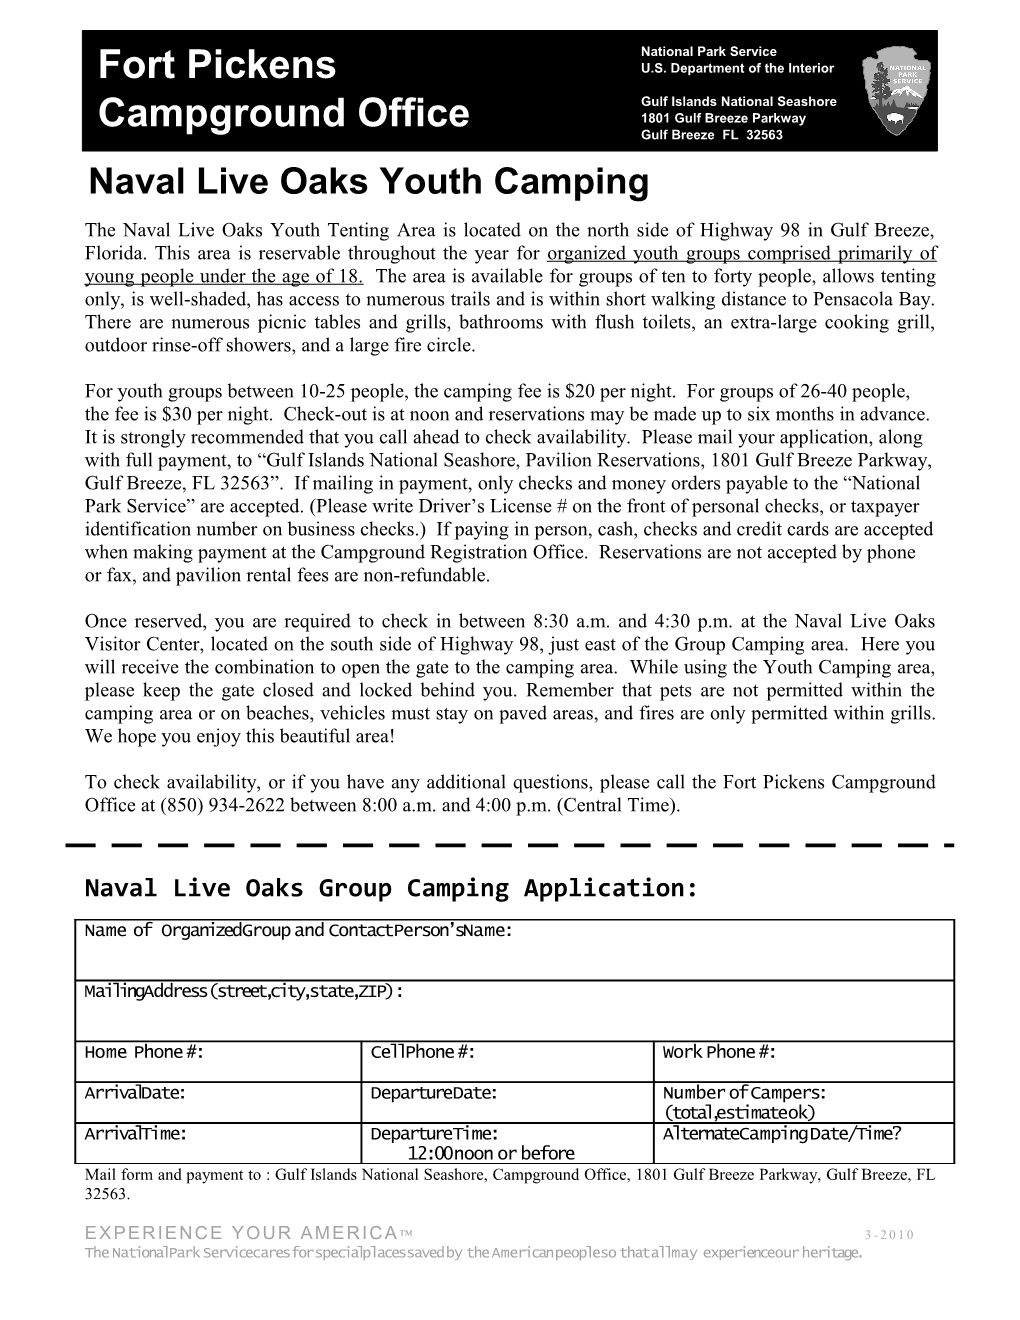 Naval Live Oaks Youth Camping